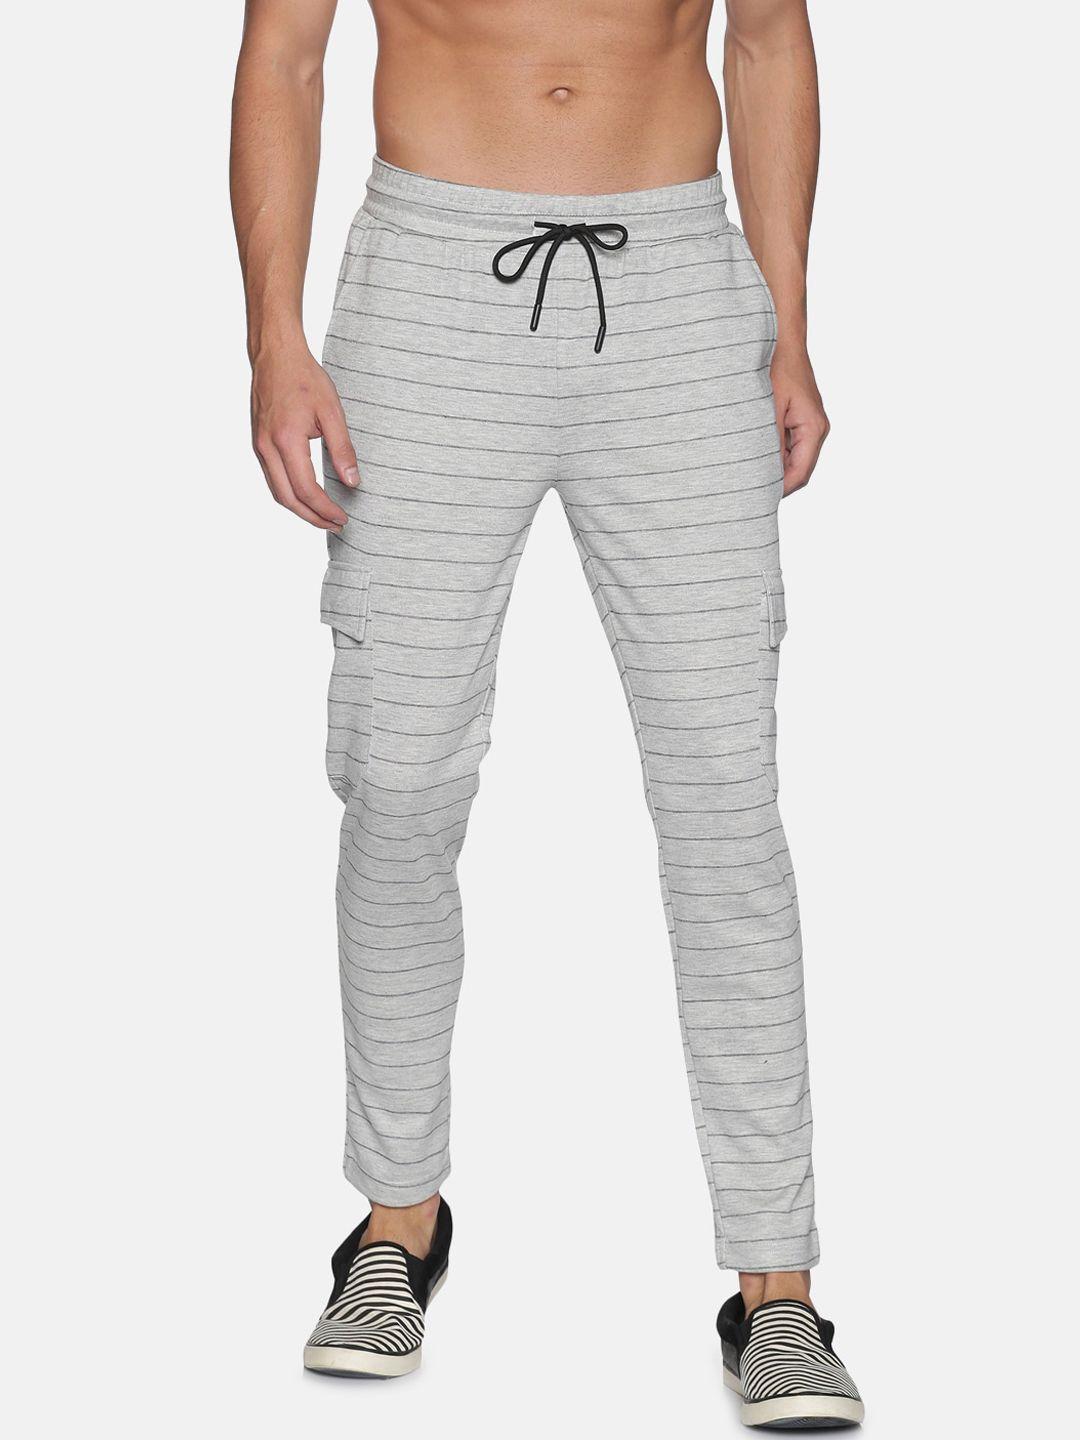 campus-sutra-men-grey-striped-straight-fit-cotton-track-pants